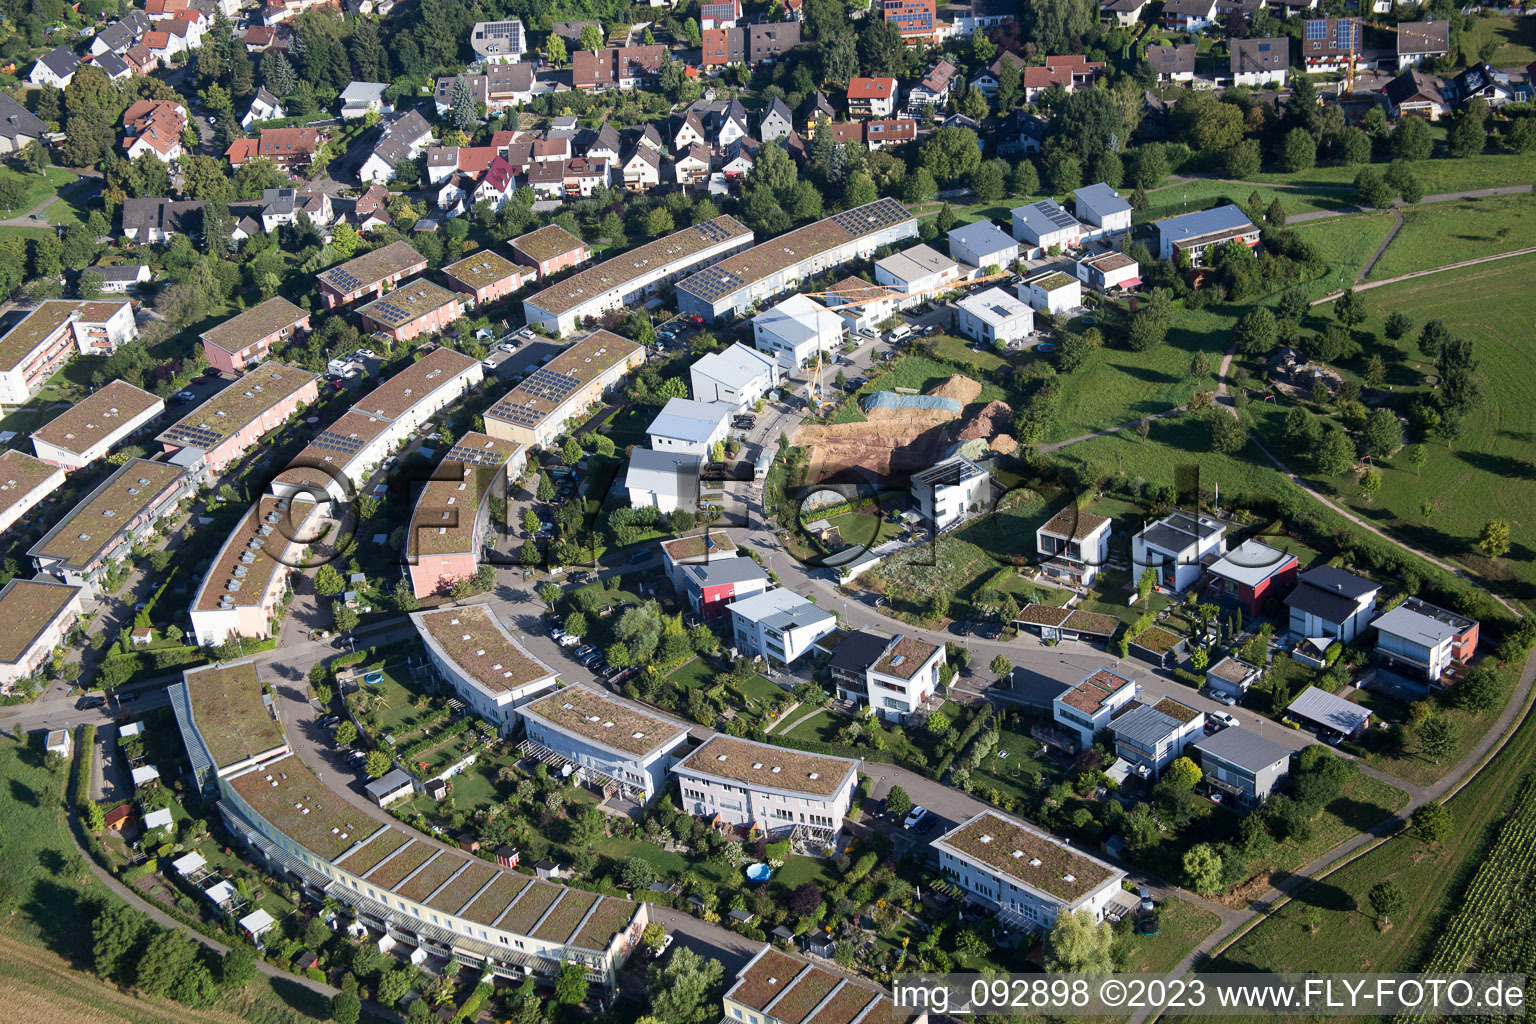 District Hohenwettersbach in Karlsruhe in the state Baden-Wuerttemberg, Germany seen from a drone